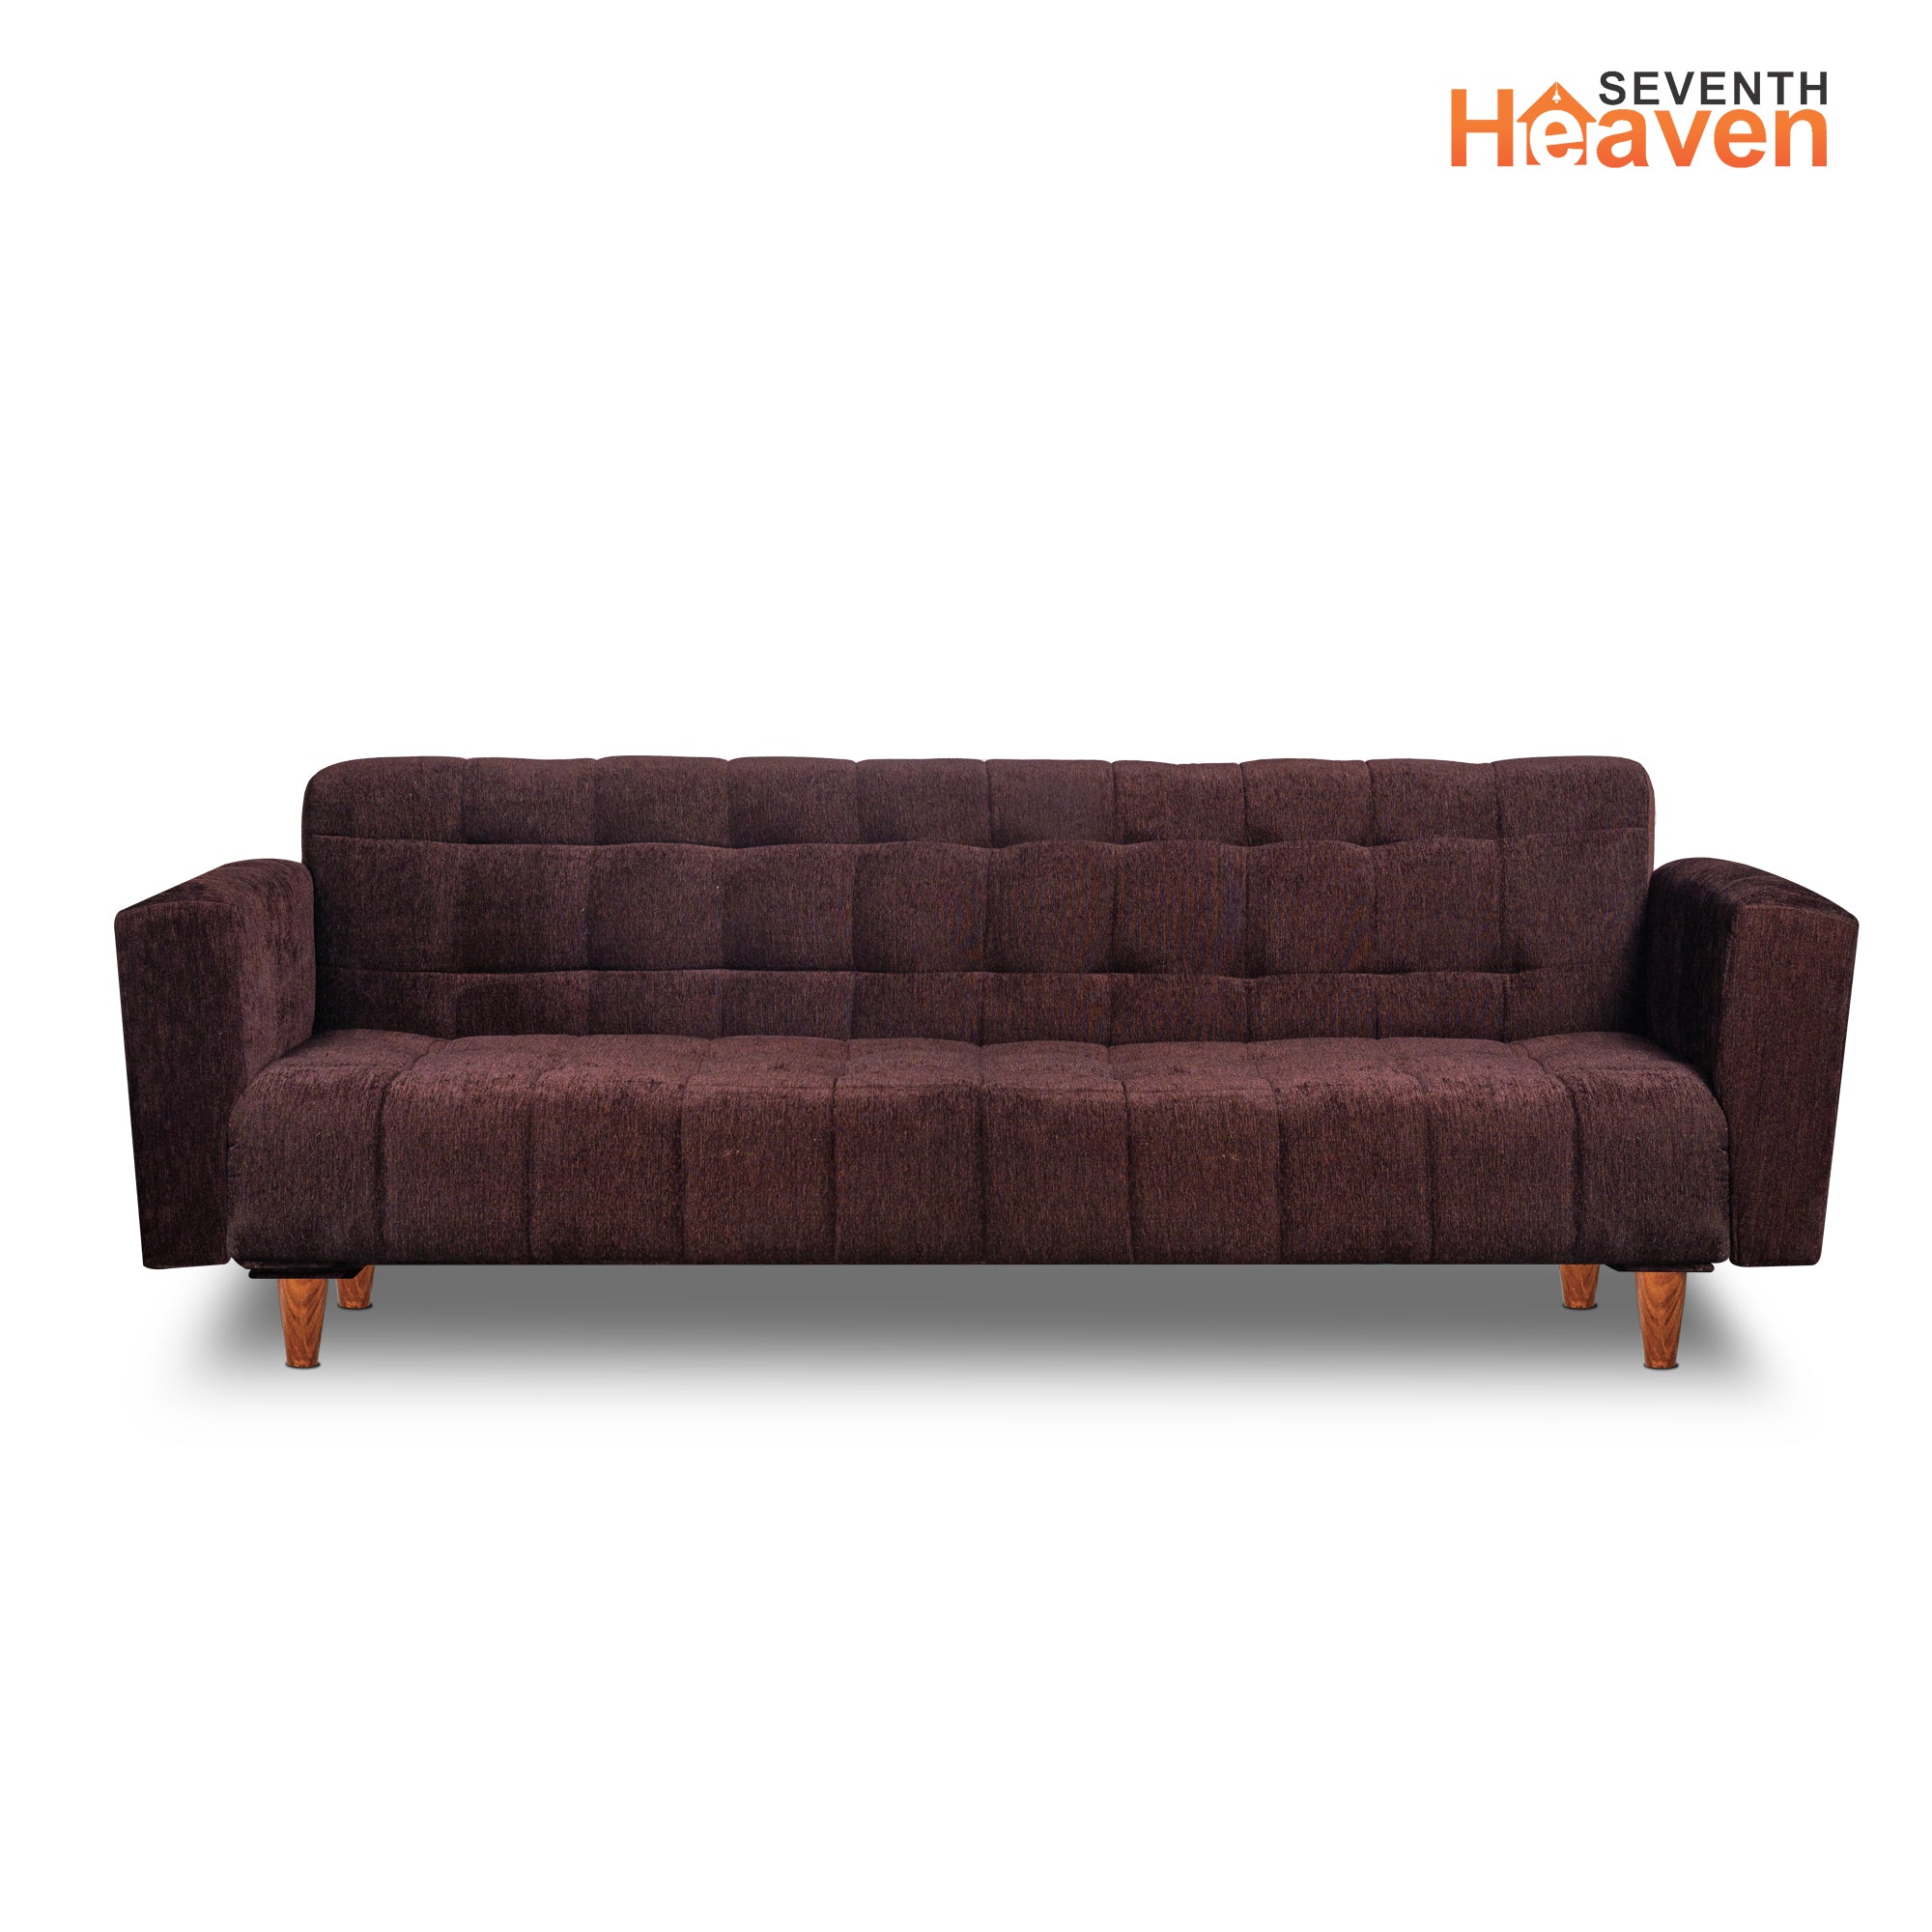 Seventh Heaven 4 Seater Wooden Sofa cum Bed, Chenille Molfino Fabric 72x36x16: 3 Year Warranty 4 Seater Single Solid Wood Pull Out Sofa Cum Bed  (Finish Color - Brown Delivery Condition - DIY(Do-It-Yourself))